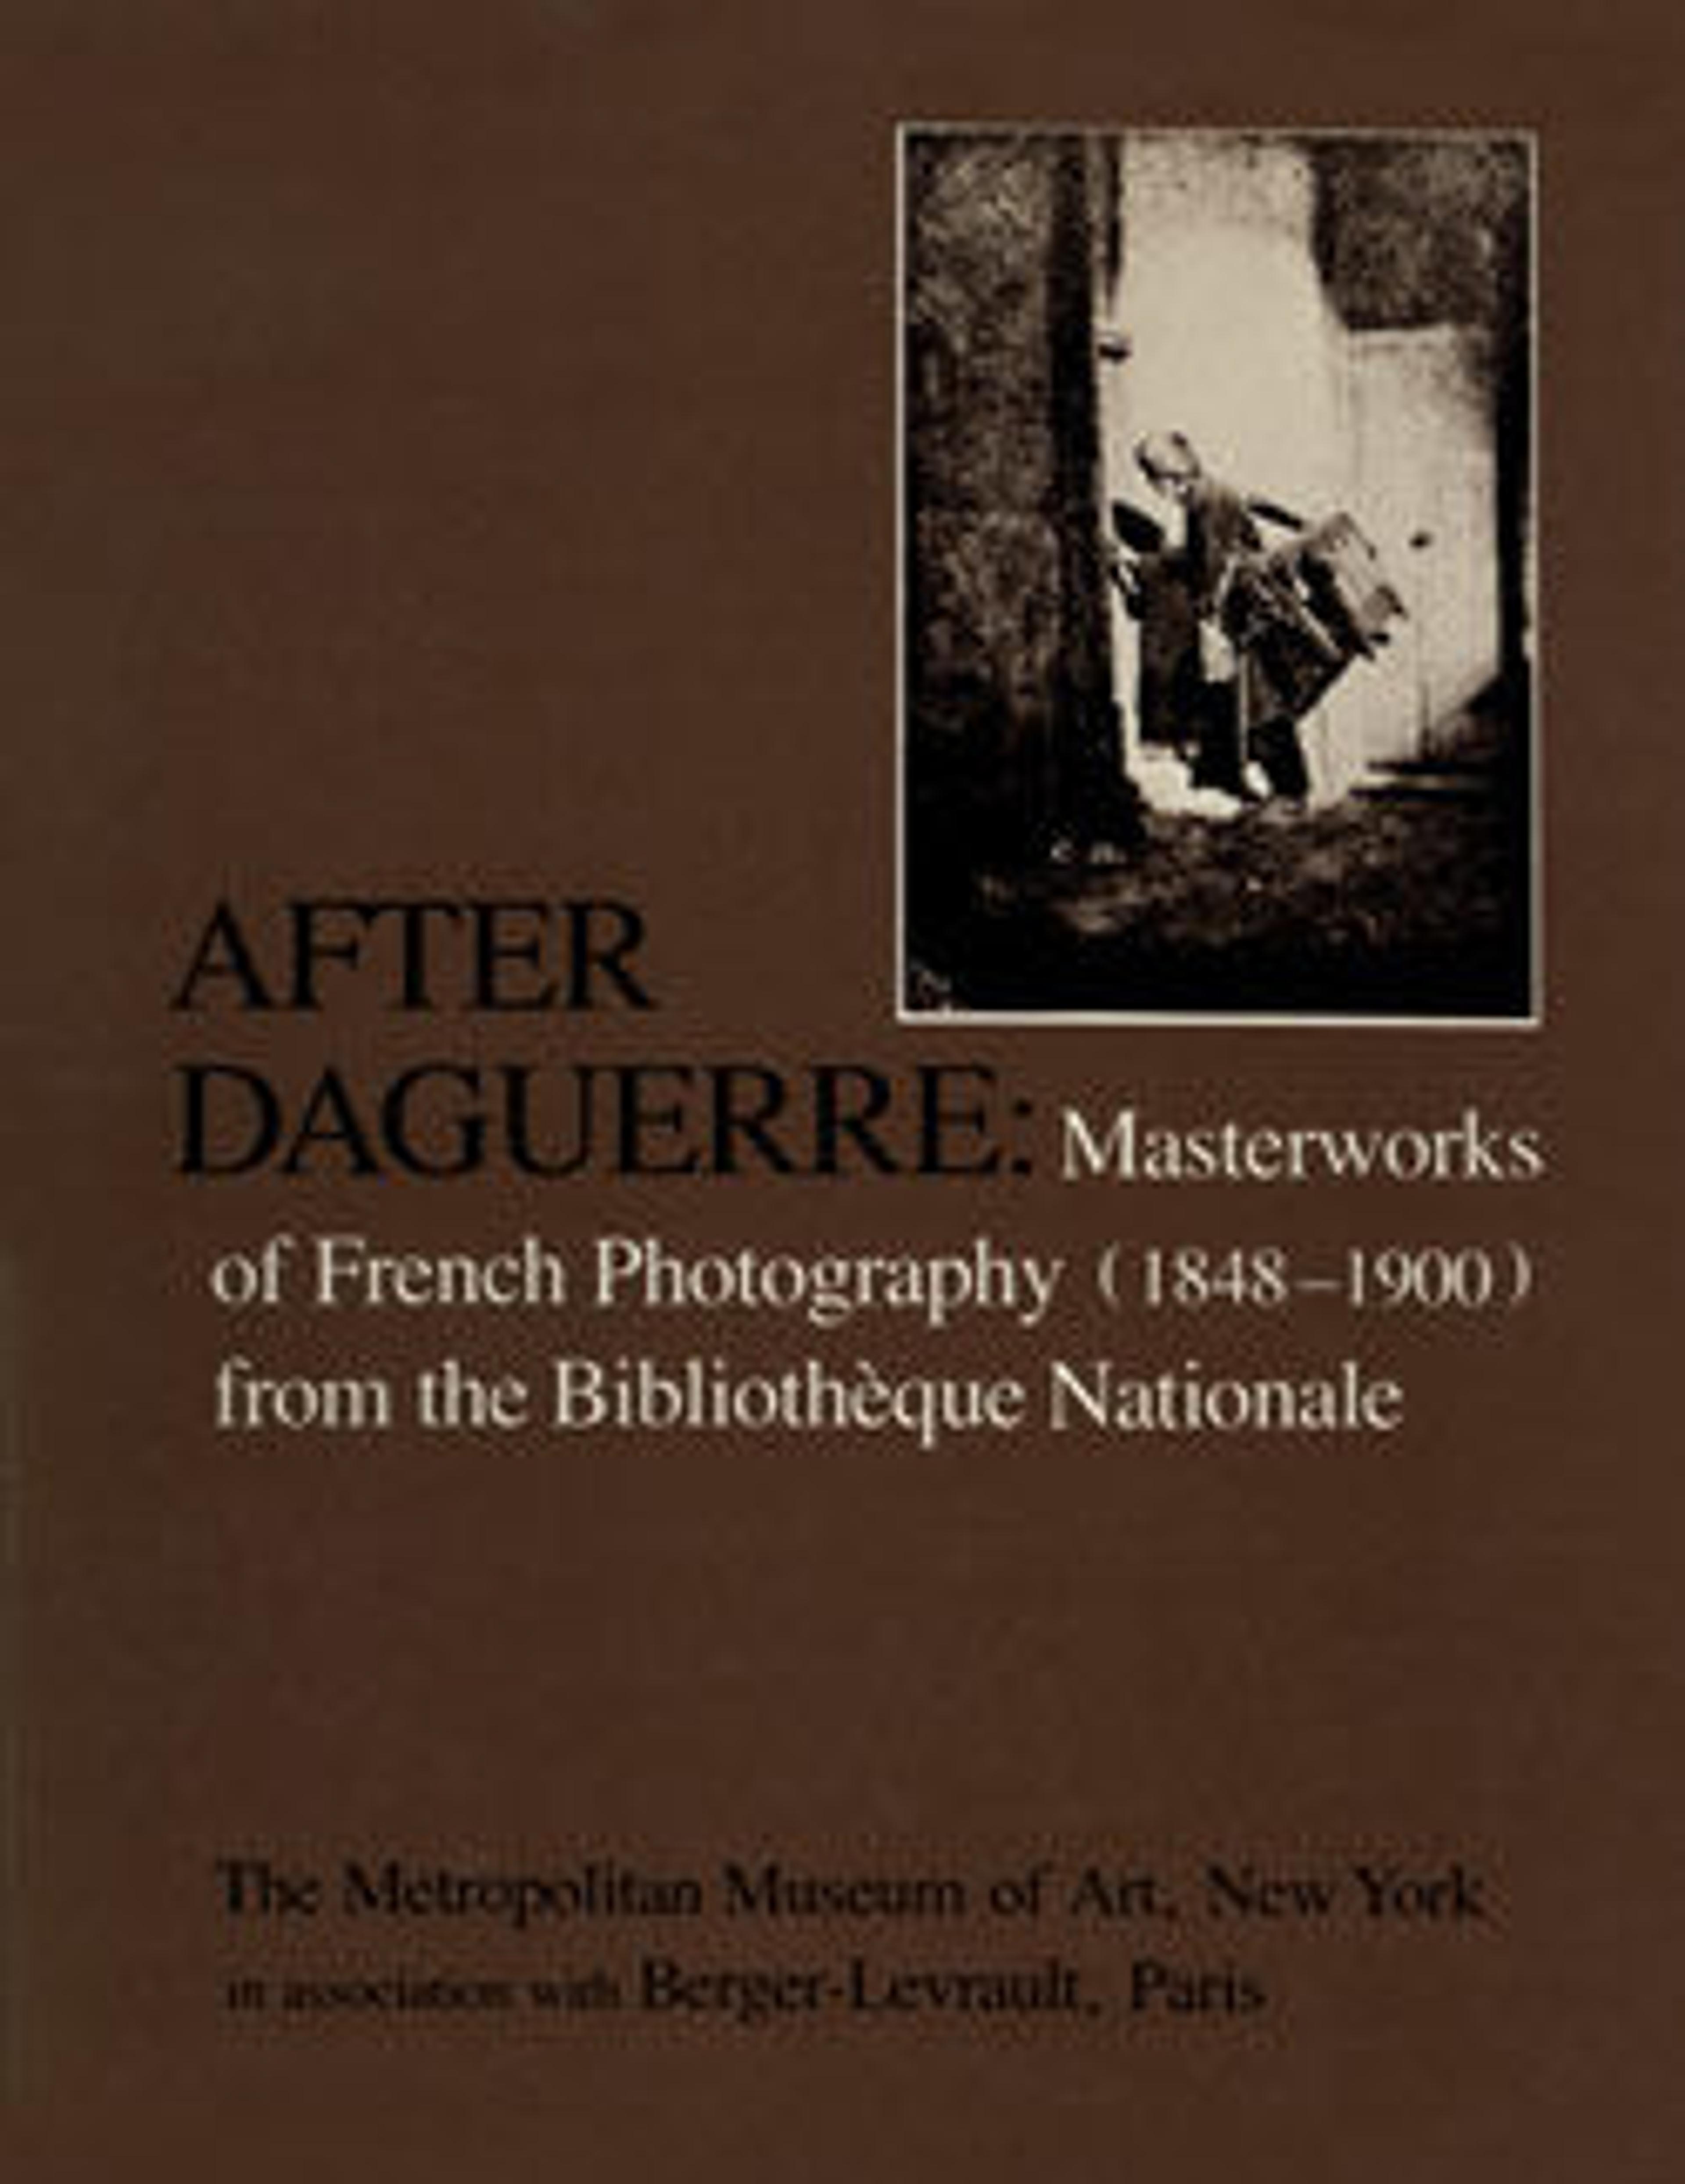 After Daguerre: Masterworks of French Photography (1848-1900) from the Bibliotheque Nationale